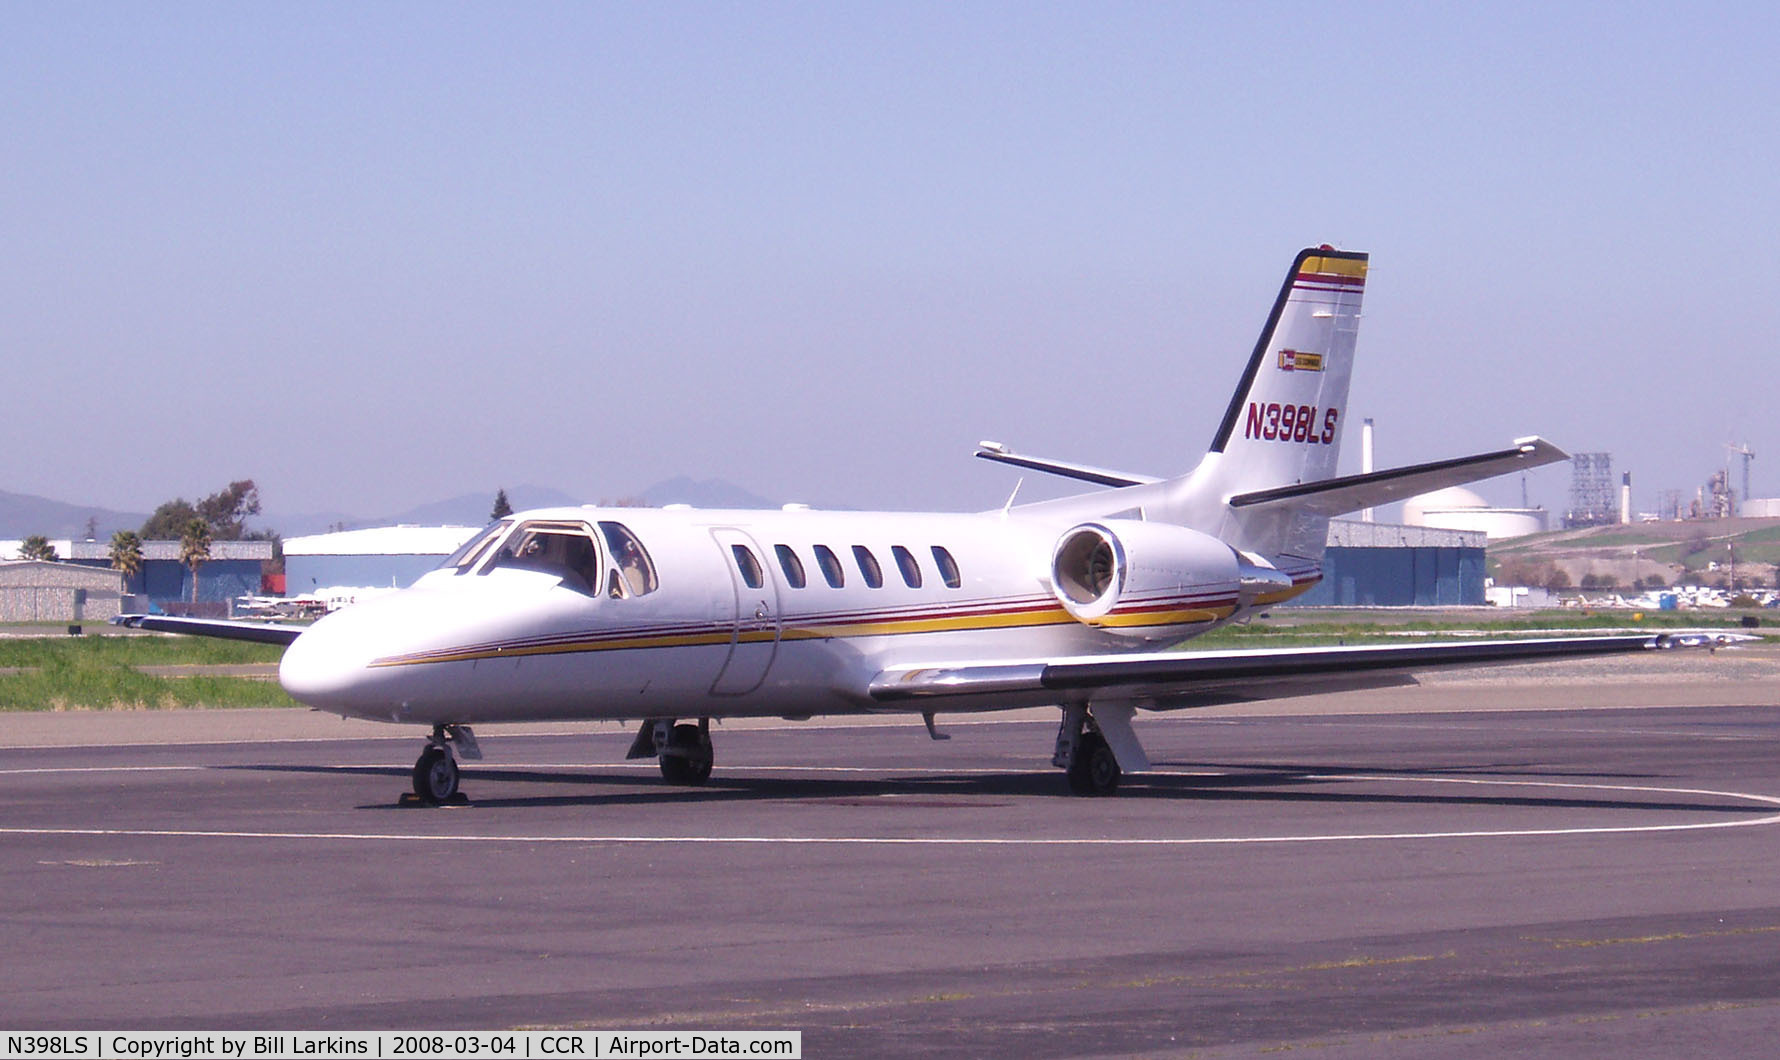 N398LS, 1998 Cessna 550 C/N 550-0853, Enjoying the California winter - clear and 70 degrees.